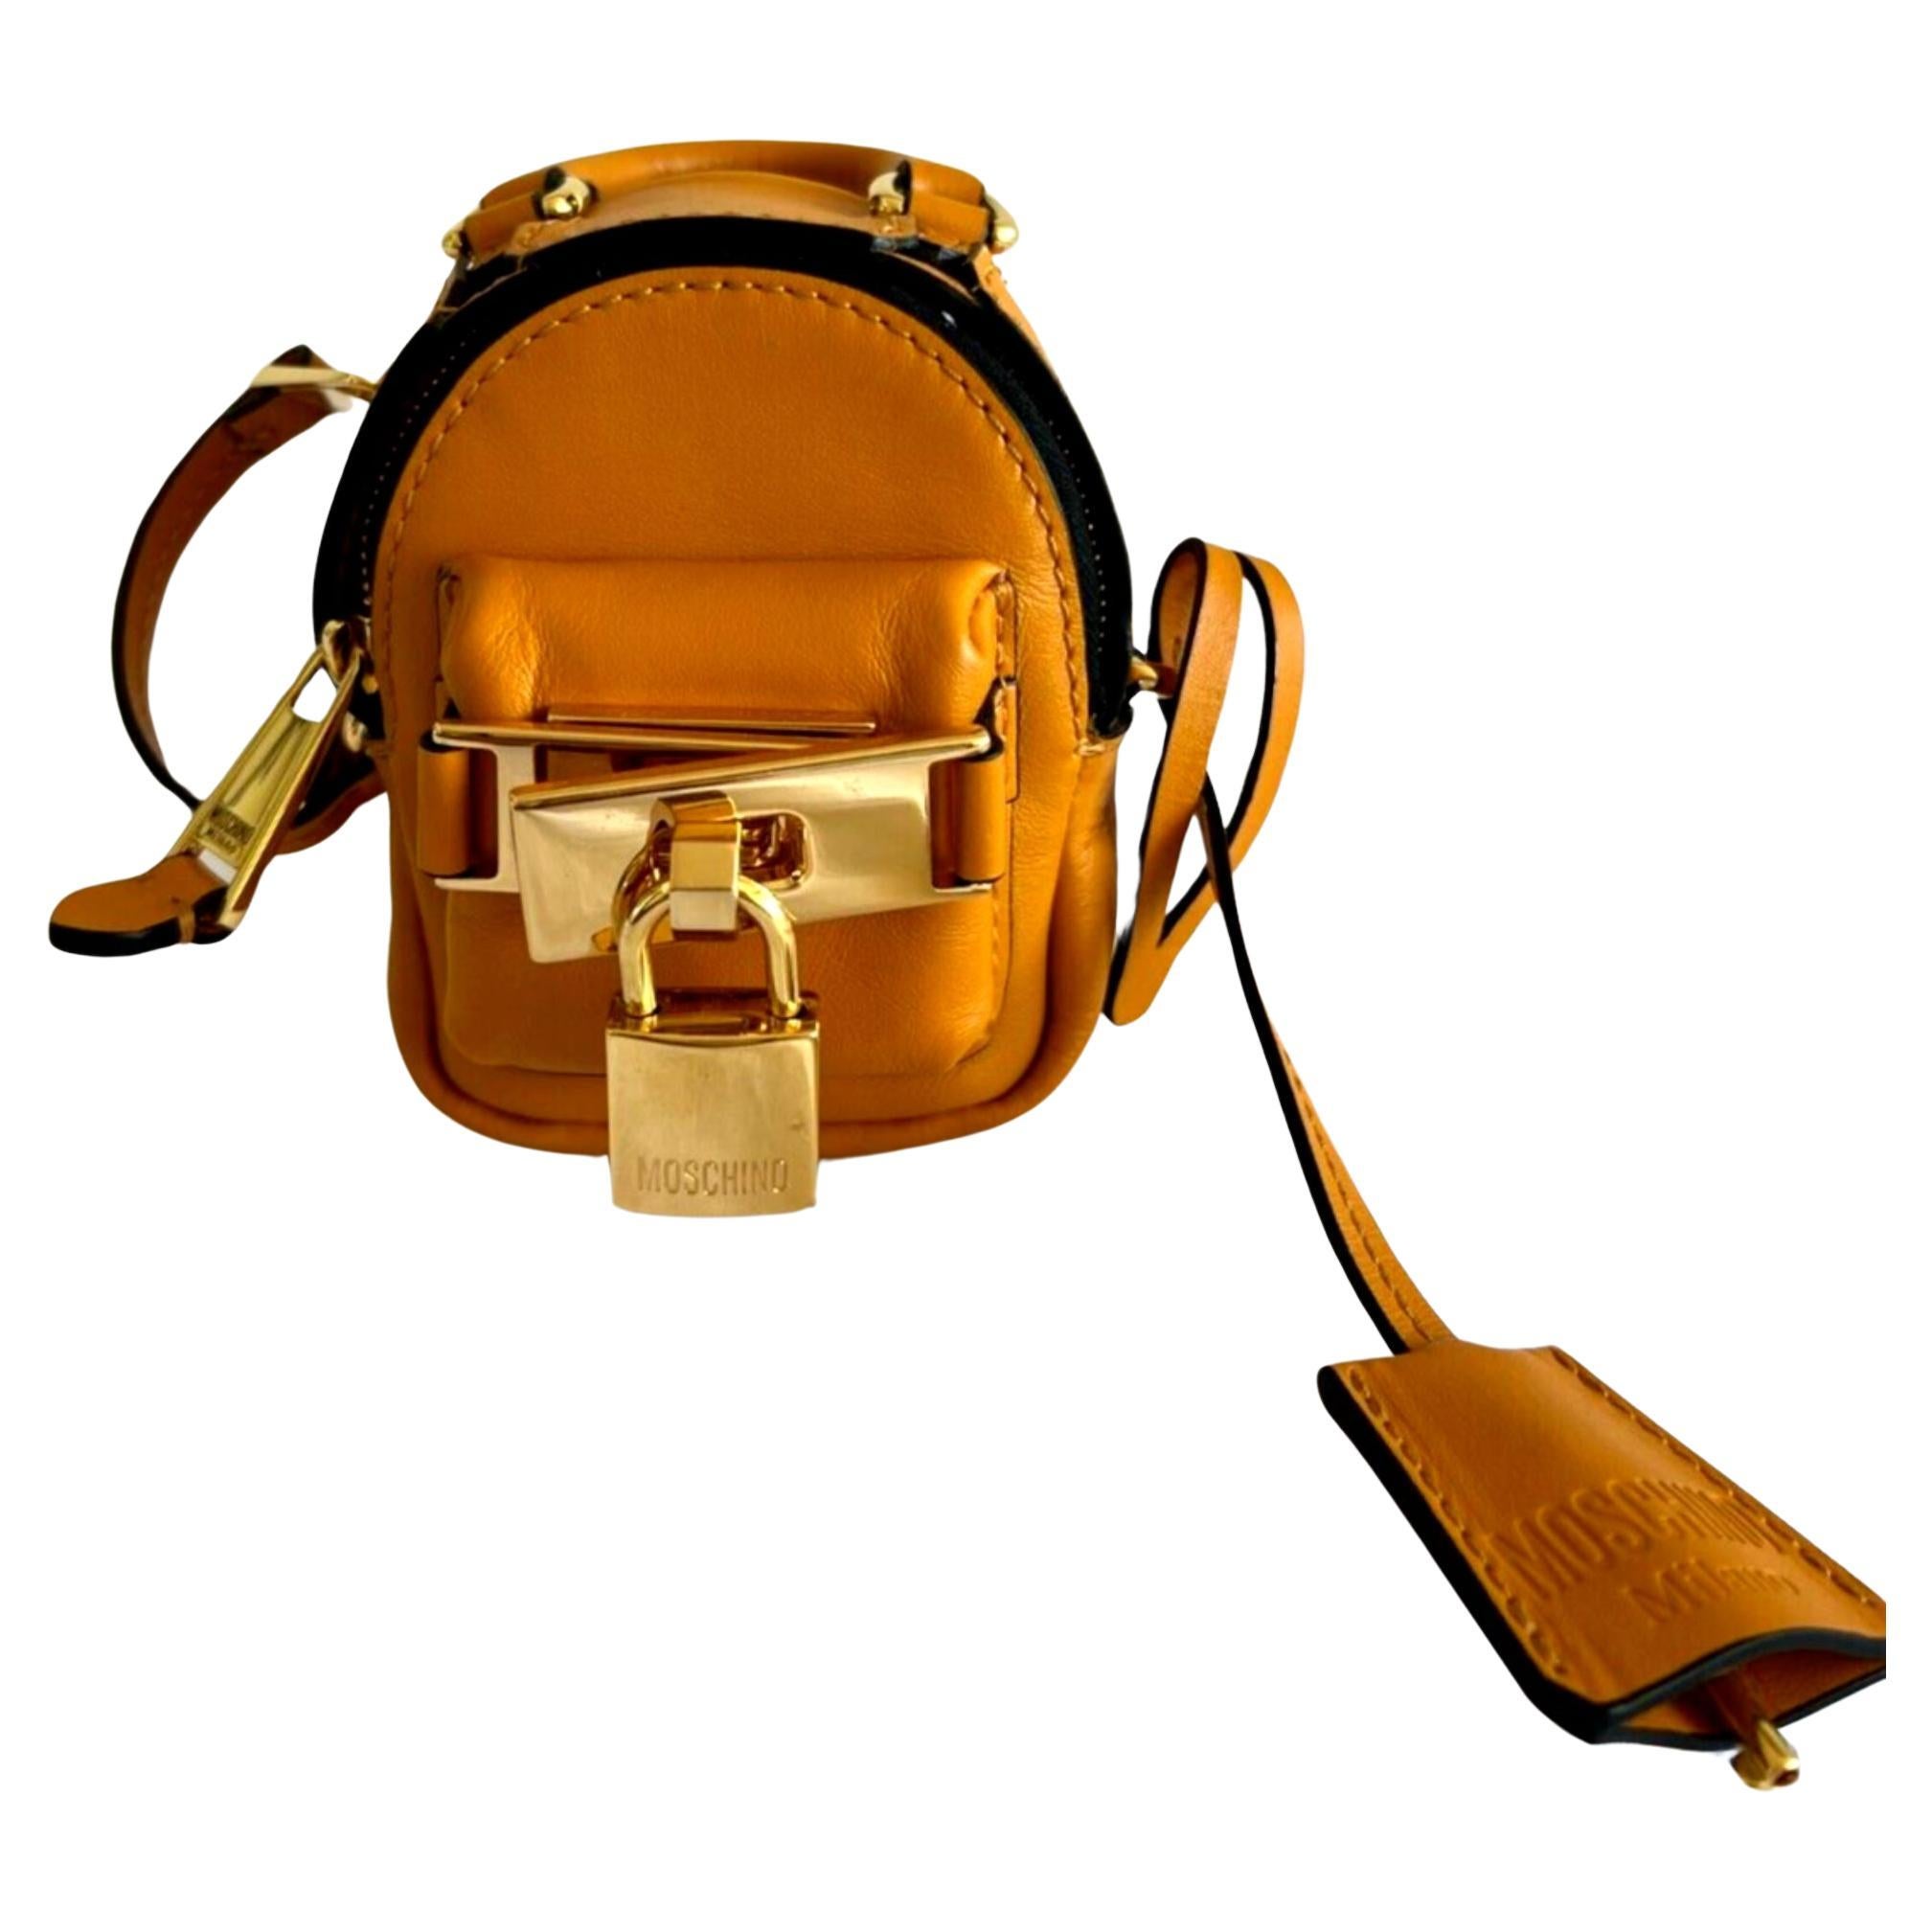 AW20 Moschino Couture Mustard Backpack Shaped Shoulder Bag by Jeremy Scott